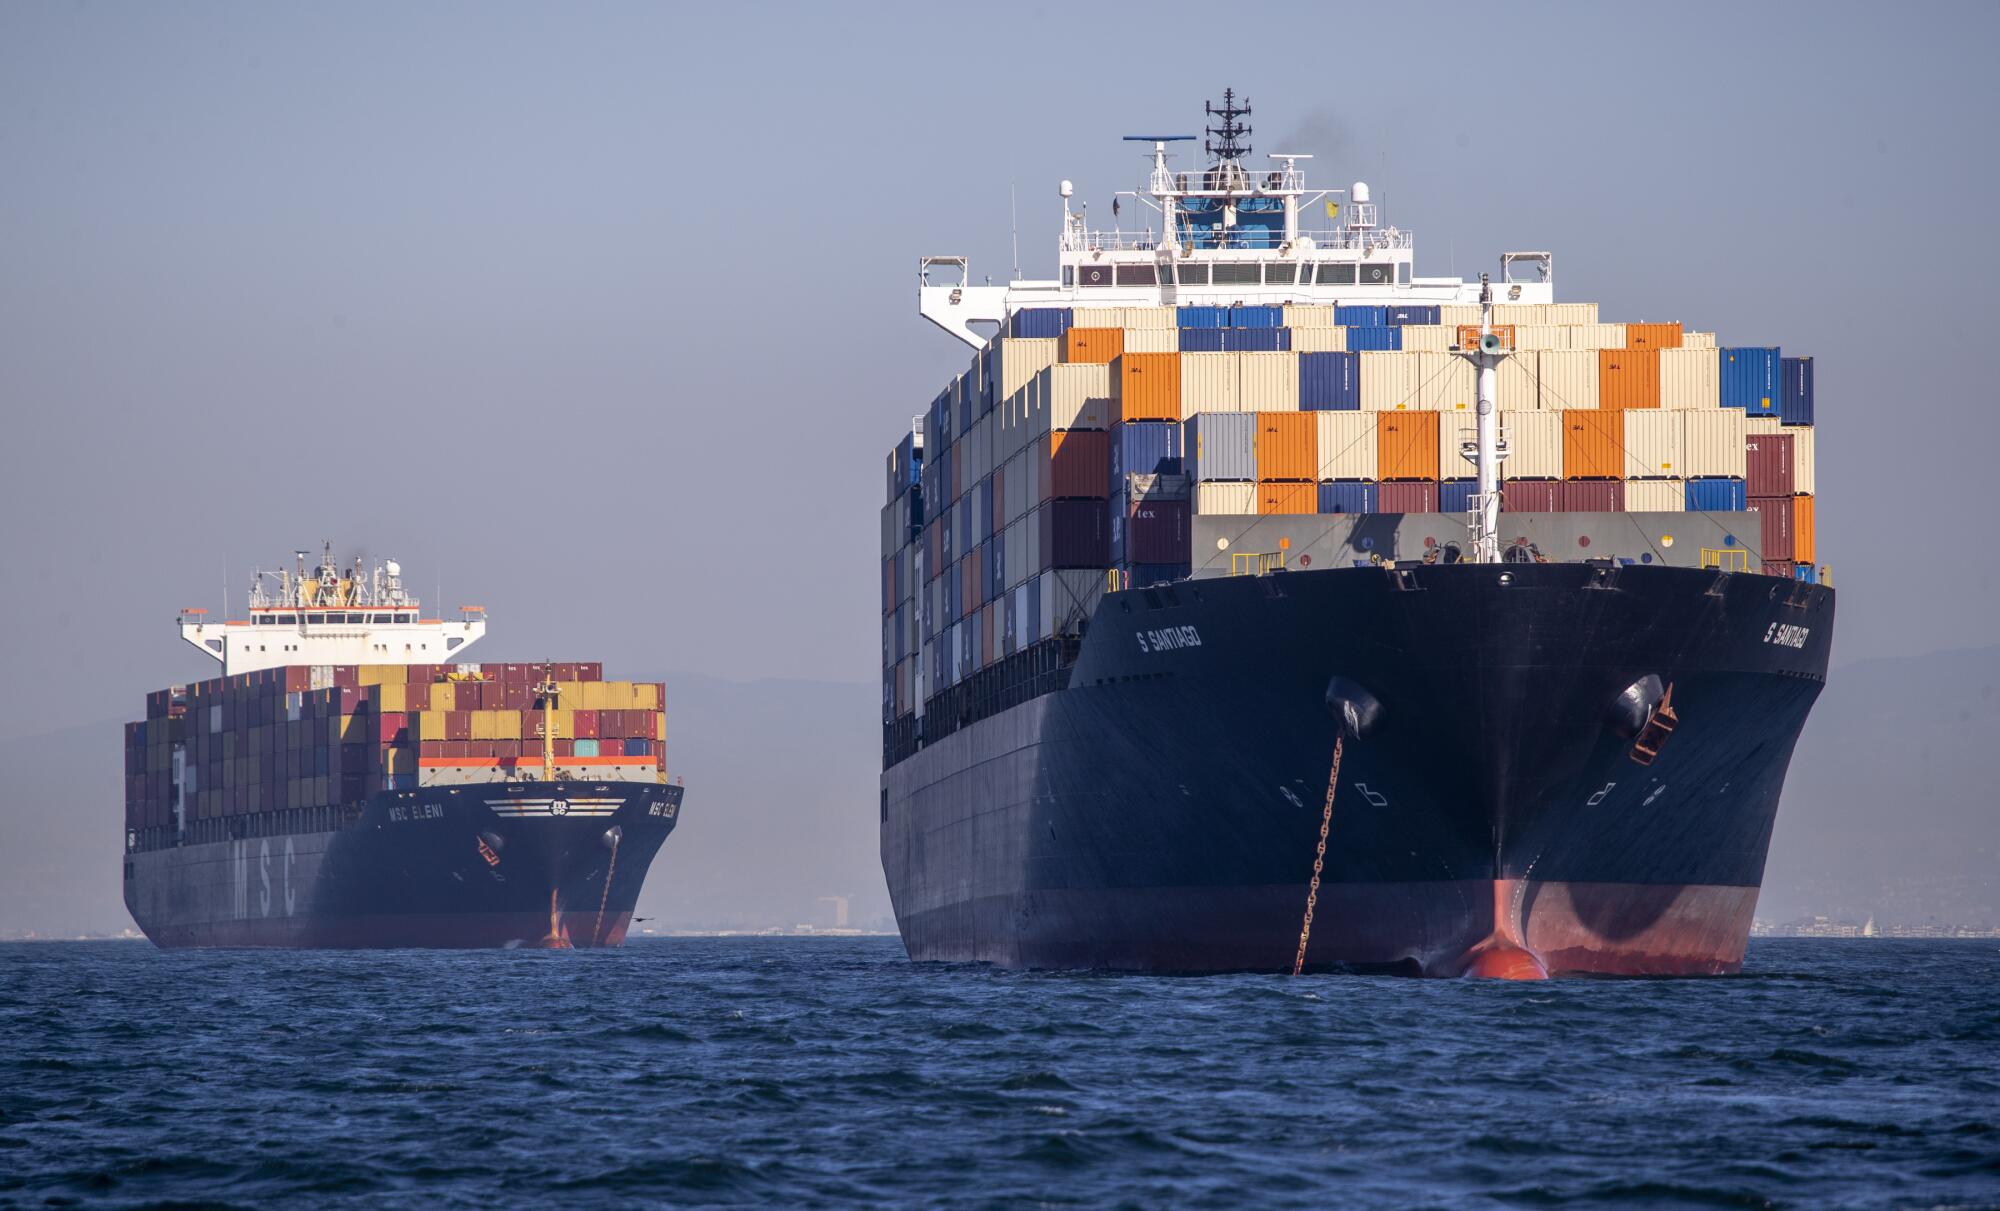 Two container ships are seen offshore